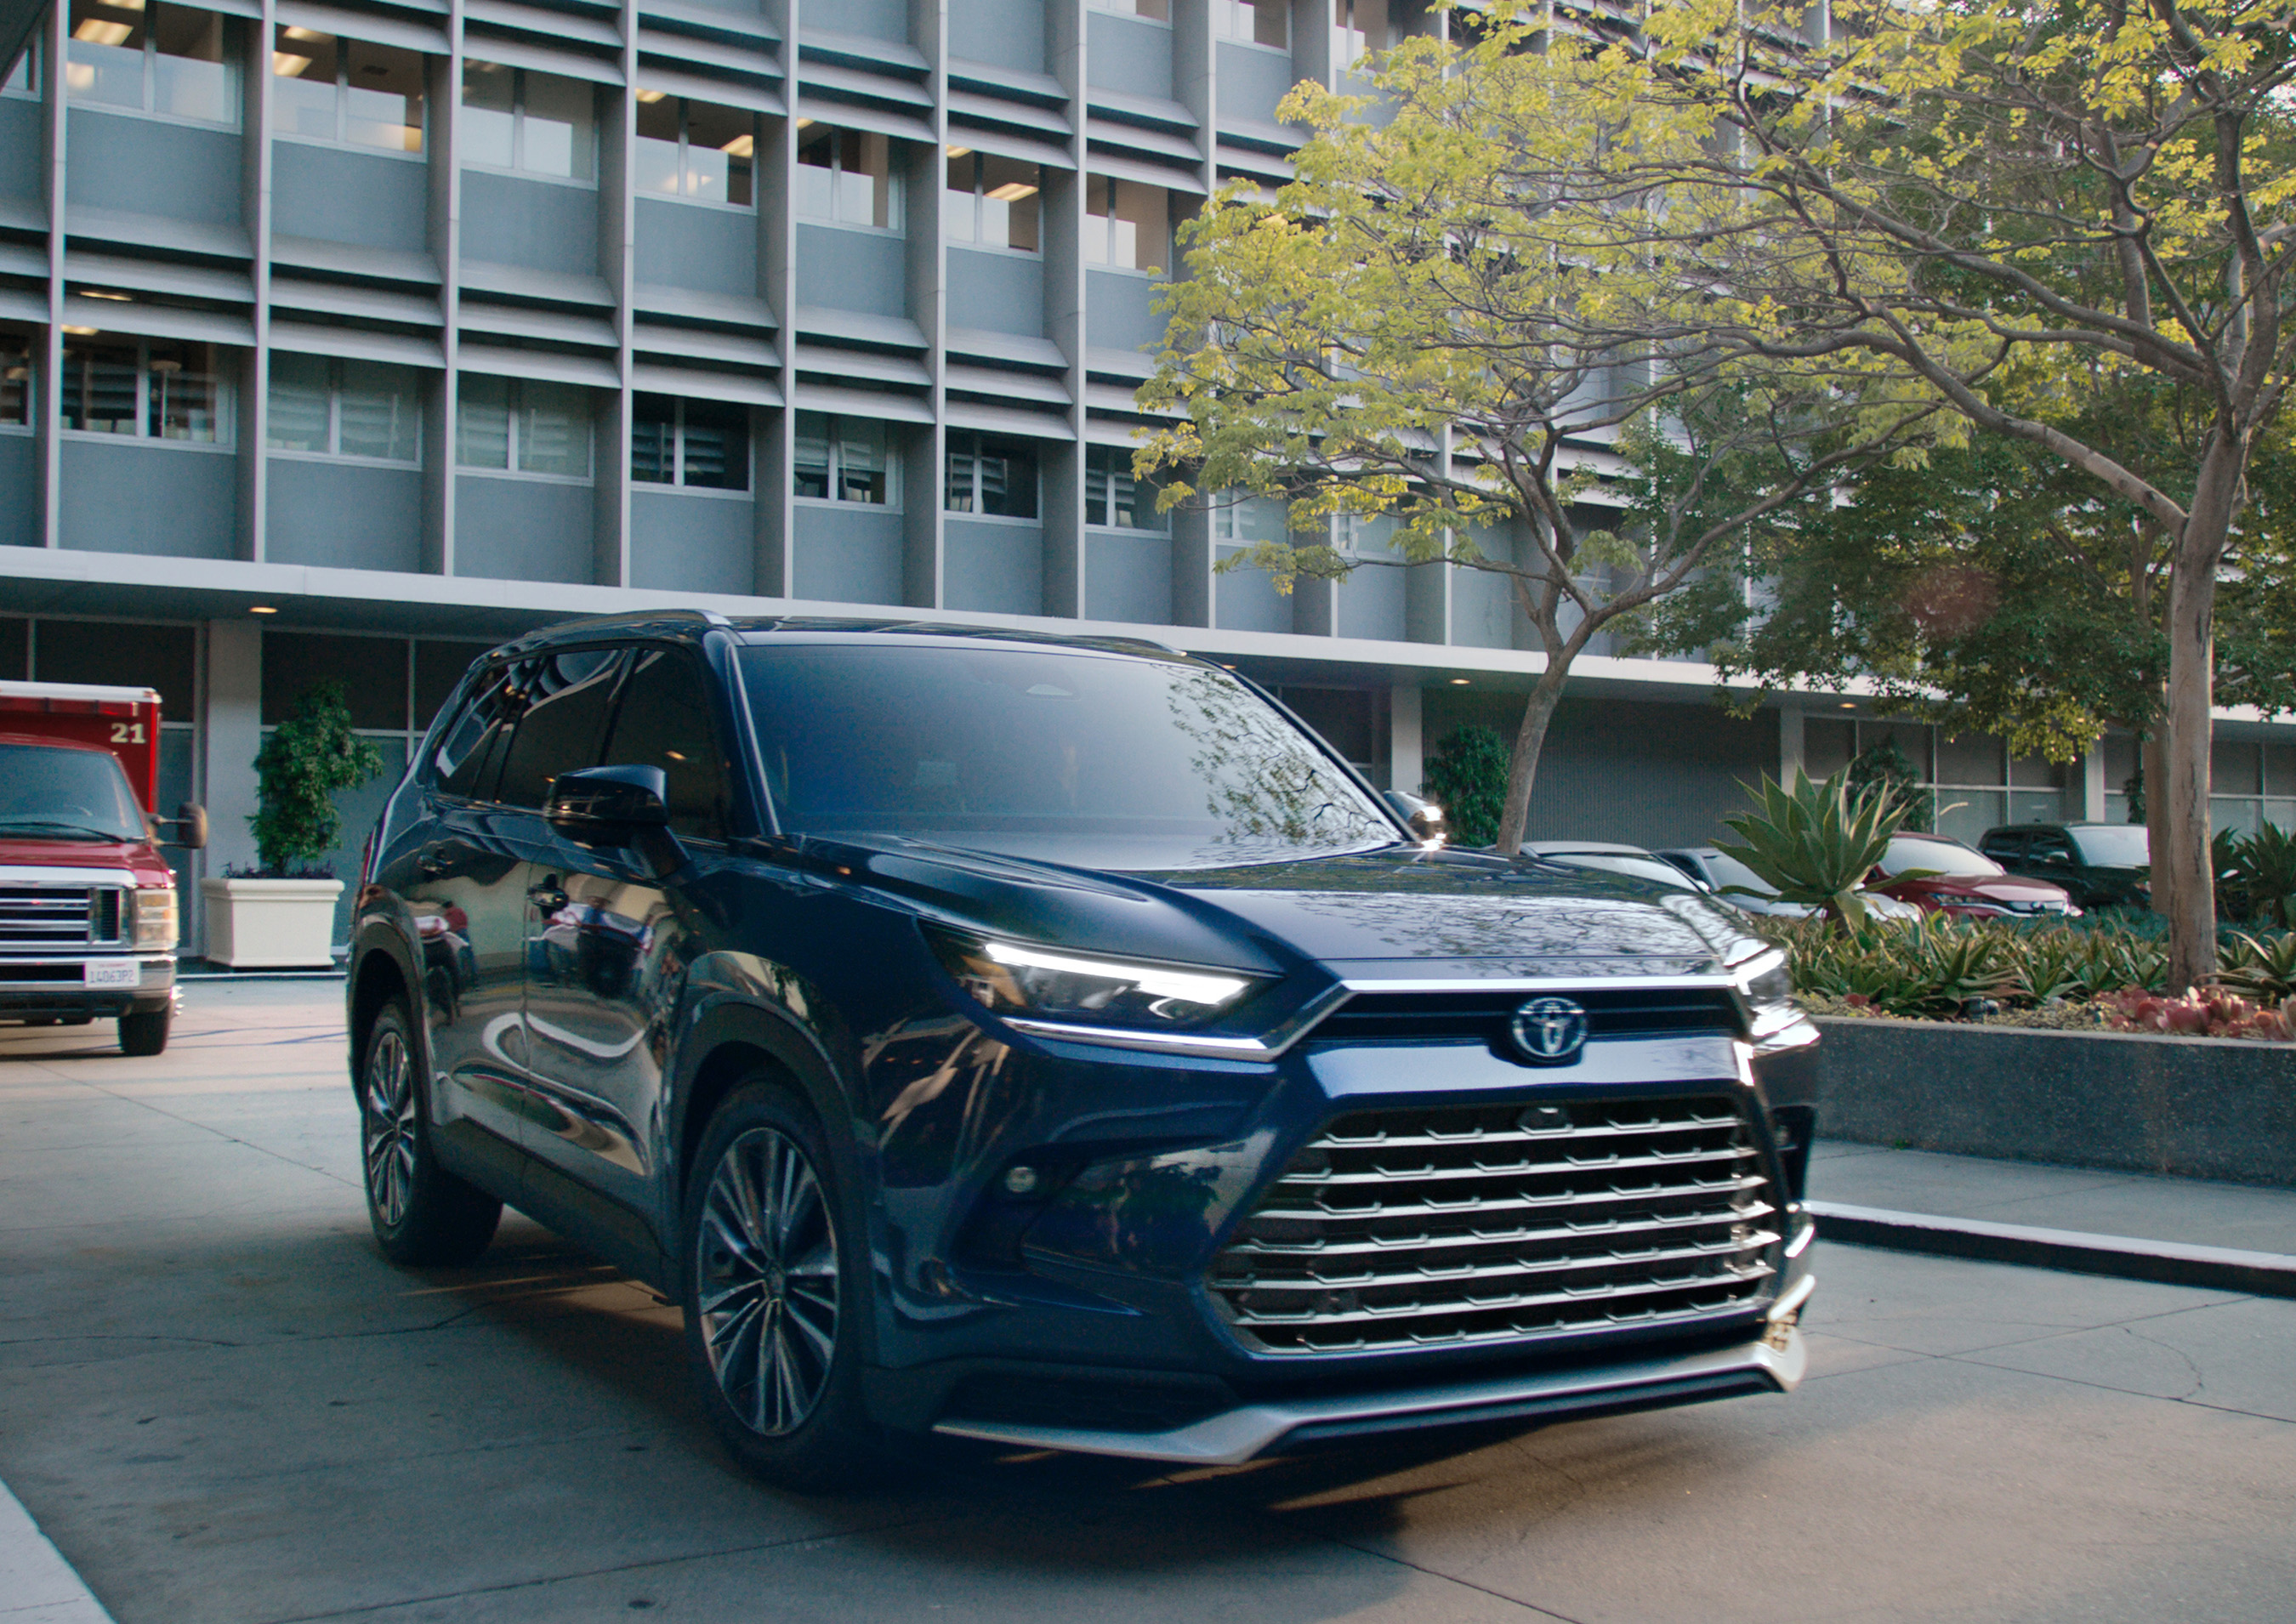 Toyota’s new spot “Labor,” developed by Conill Advertising, is part of the integrated campaign, “Life’s Grander in the Grand Highlander.”